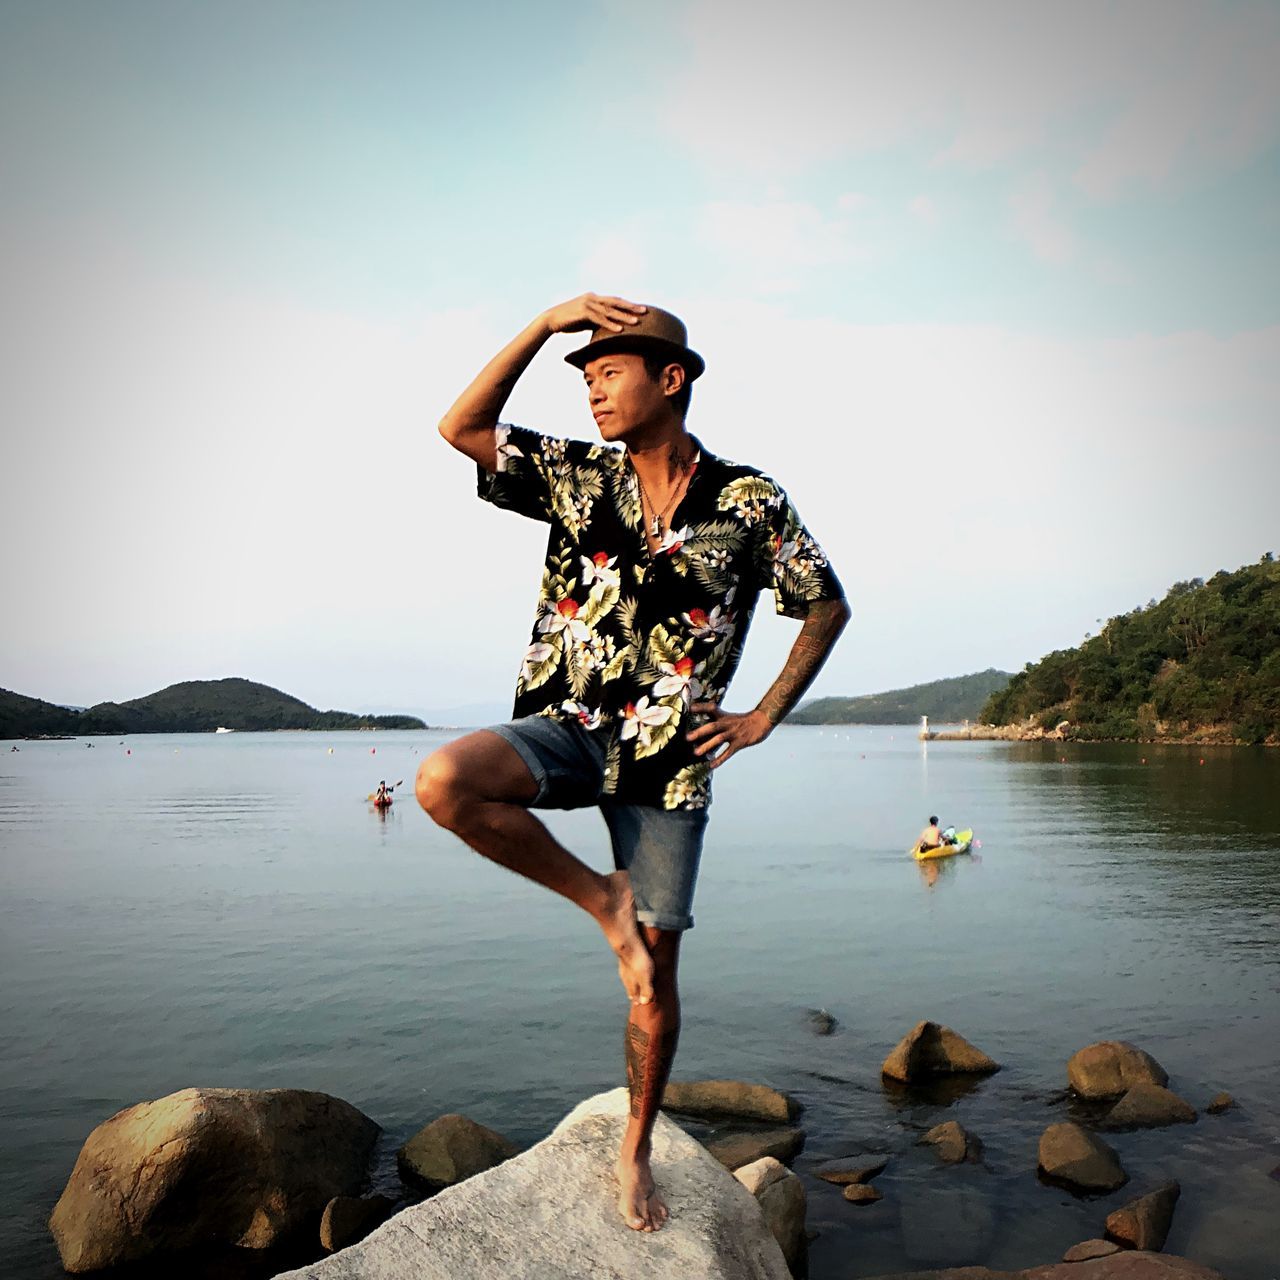 water, one person, sky, real people, lifestyles, rock, rock - object, solid, beauty in nature, leisure activity, young adult, sea, scenics - nature, full length, nature, casual clothing, day, standing, outdoors, shorts